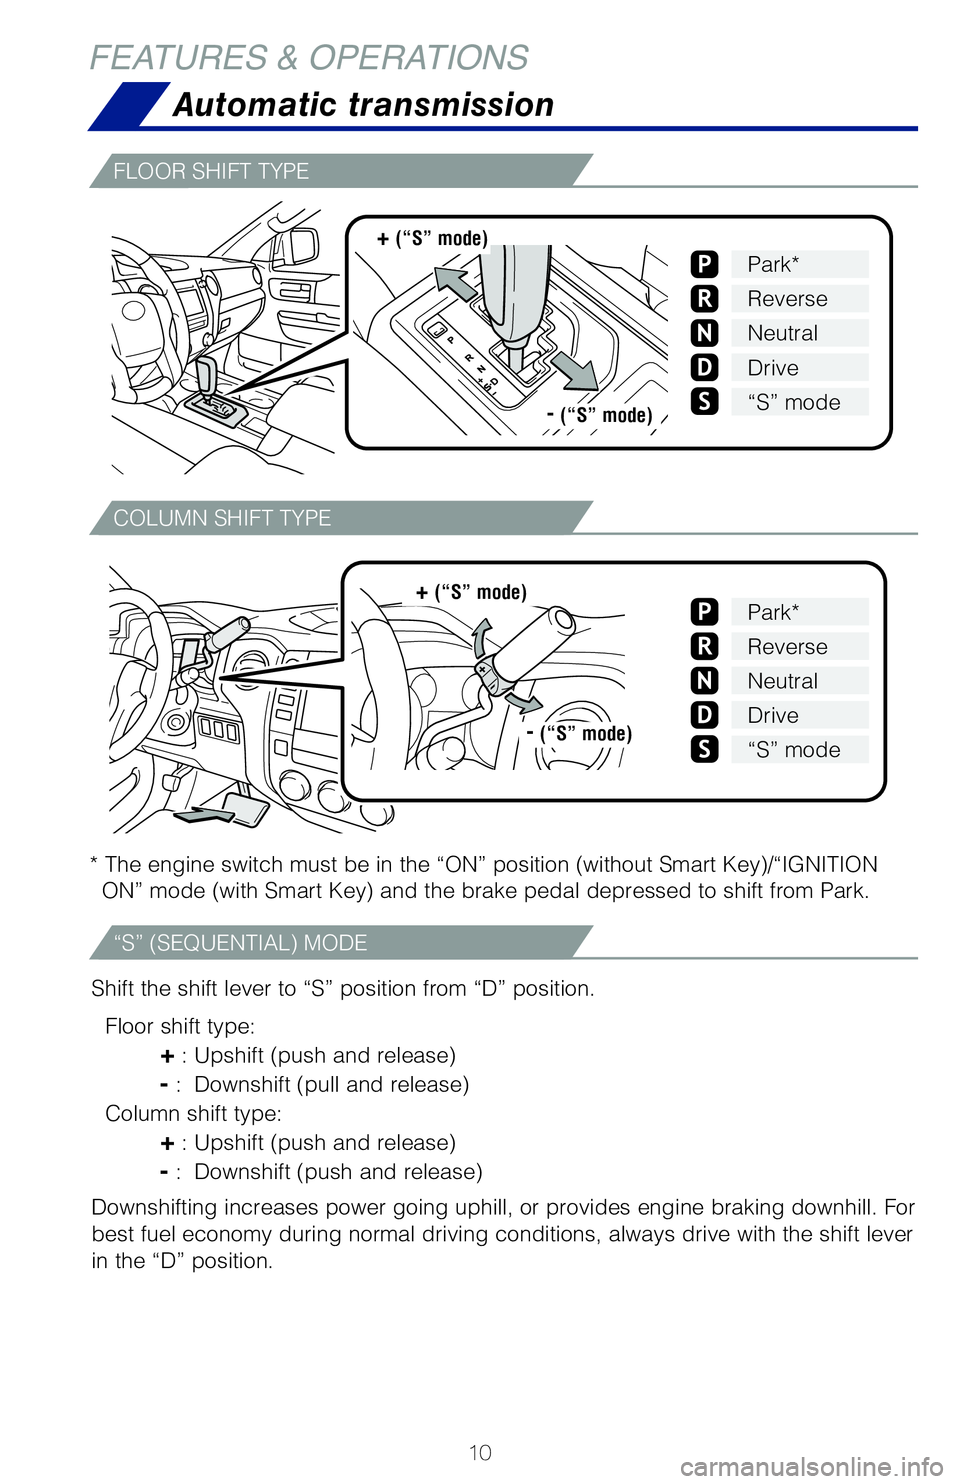 TOYOTA TUNDRA 2020  Owners Manual (in English) 10
FEATURES & OPERATIONS
Shift the shift lever to “S” position from “D” position.
Floor shift type: 
 + : Upshift (push and release)
 - : Downshift (pull and release)
Column shift type:
 + : U